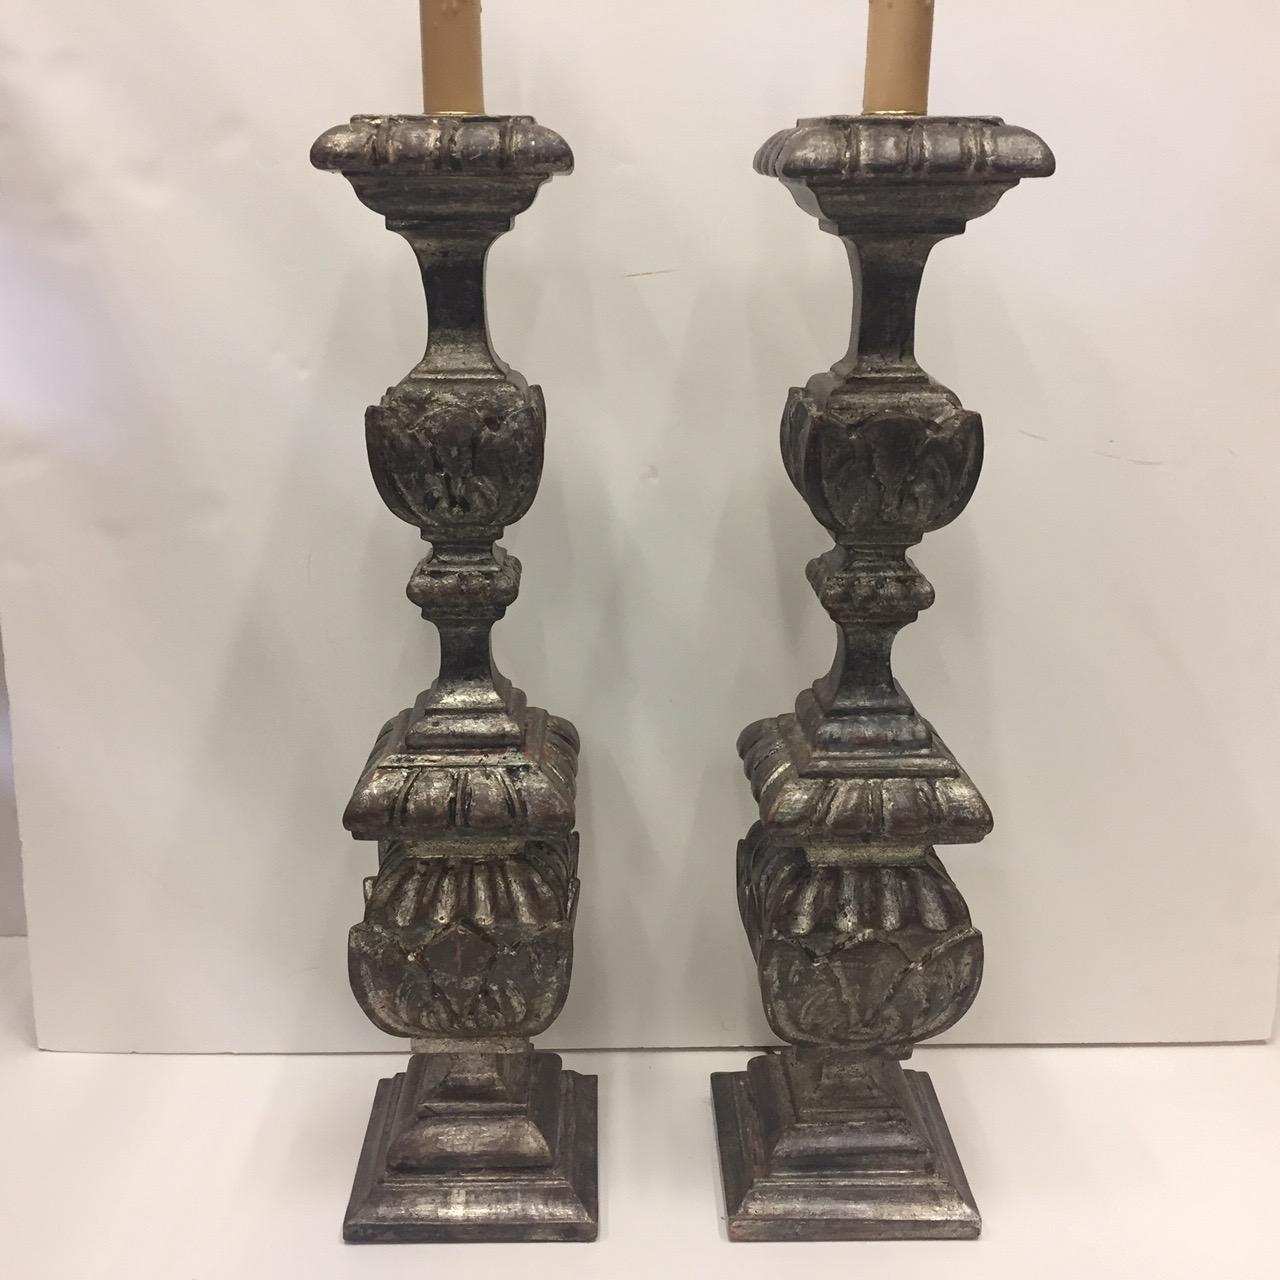 Impressive Tall Pair of Antique Continental Silverleaf Pricket Candlestick Lamps 3